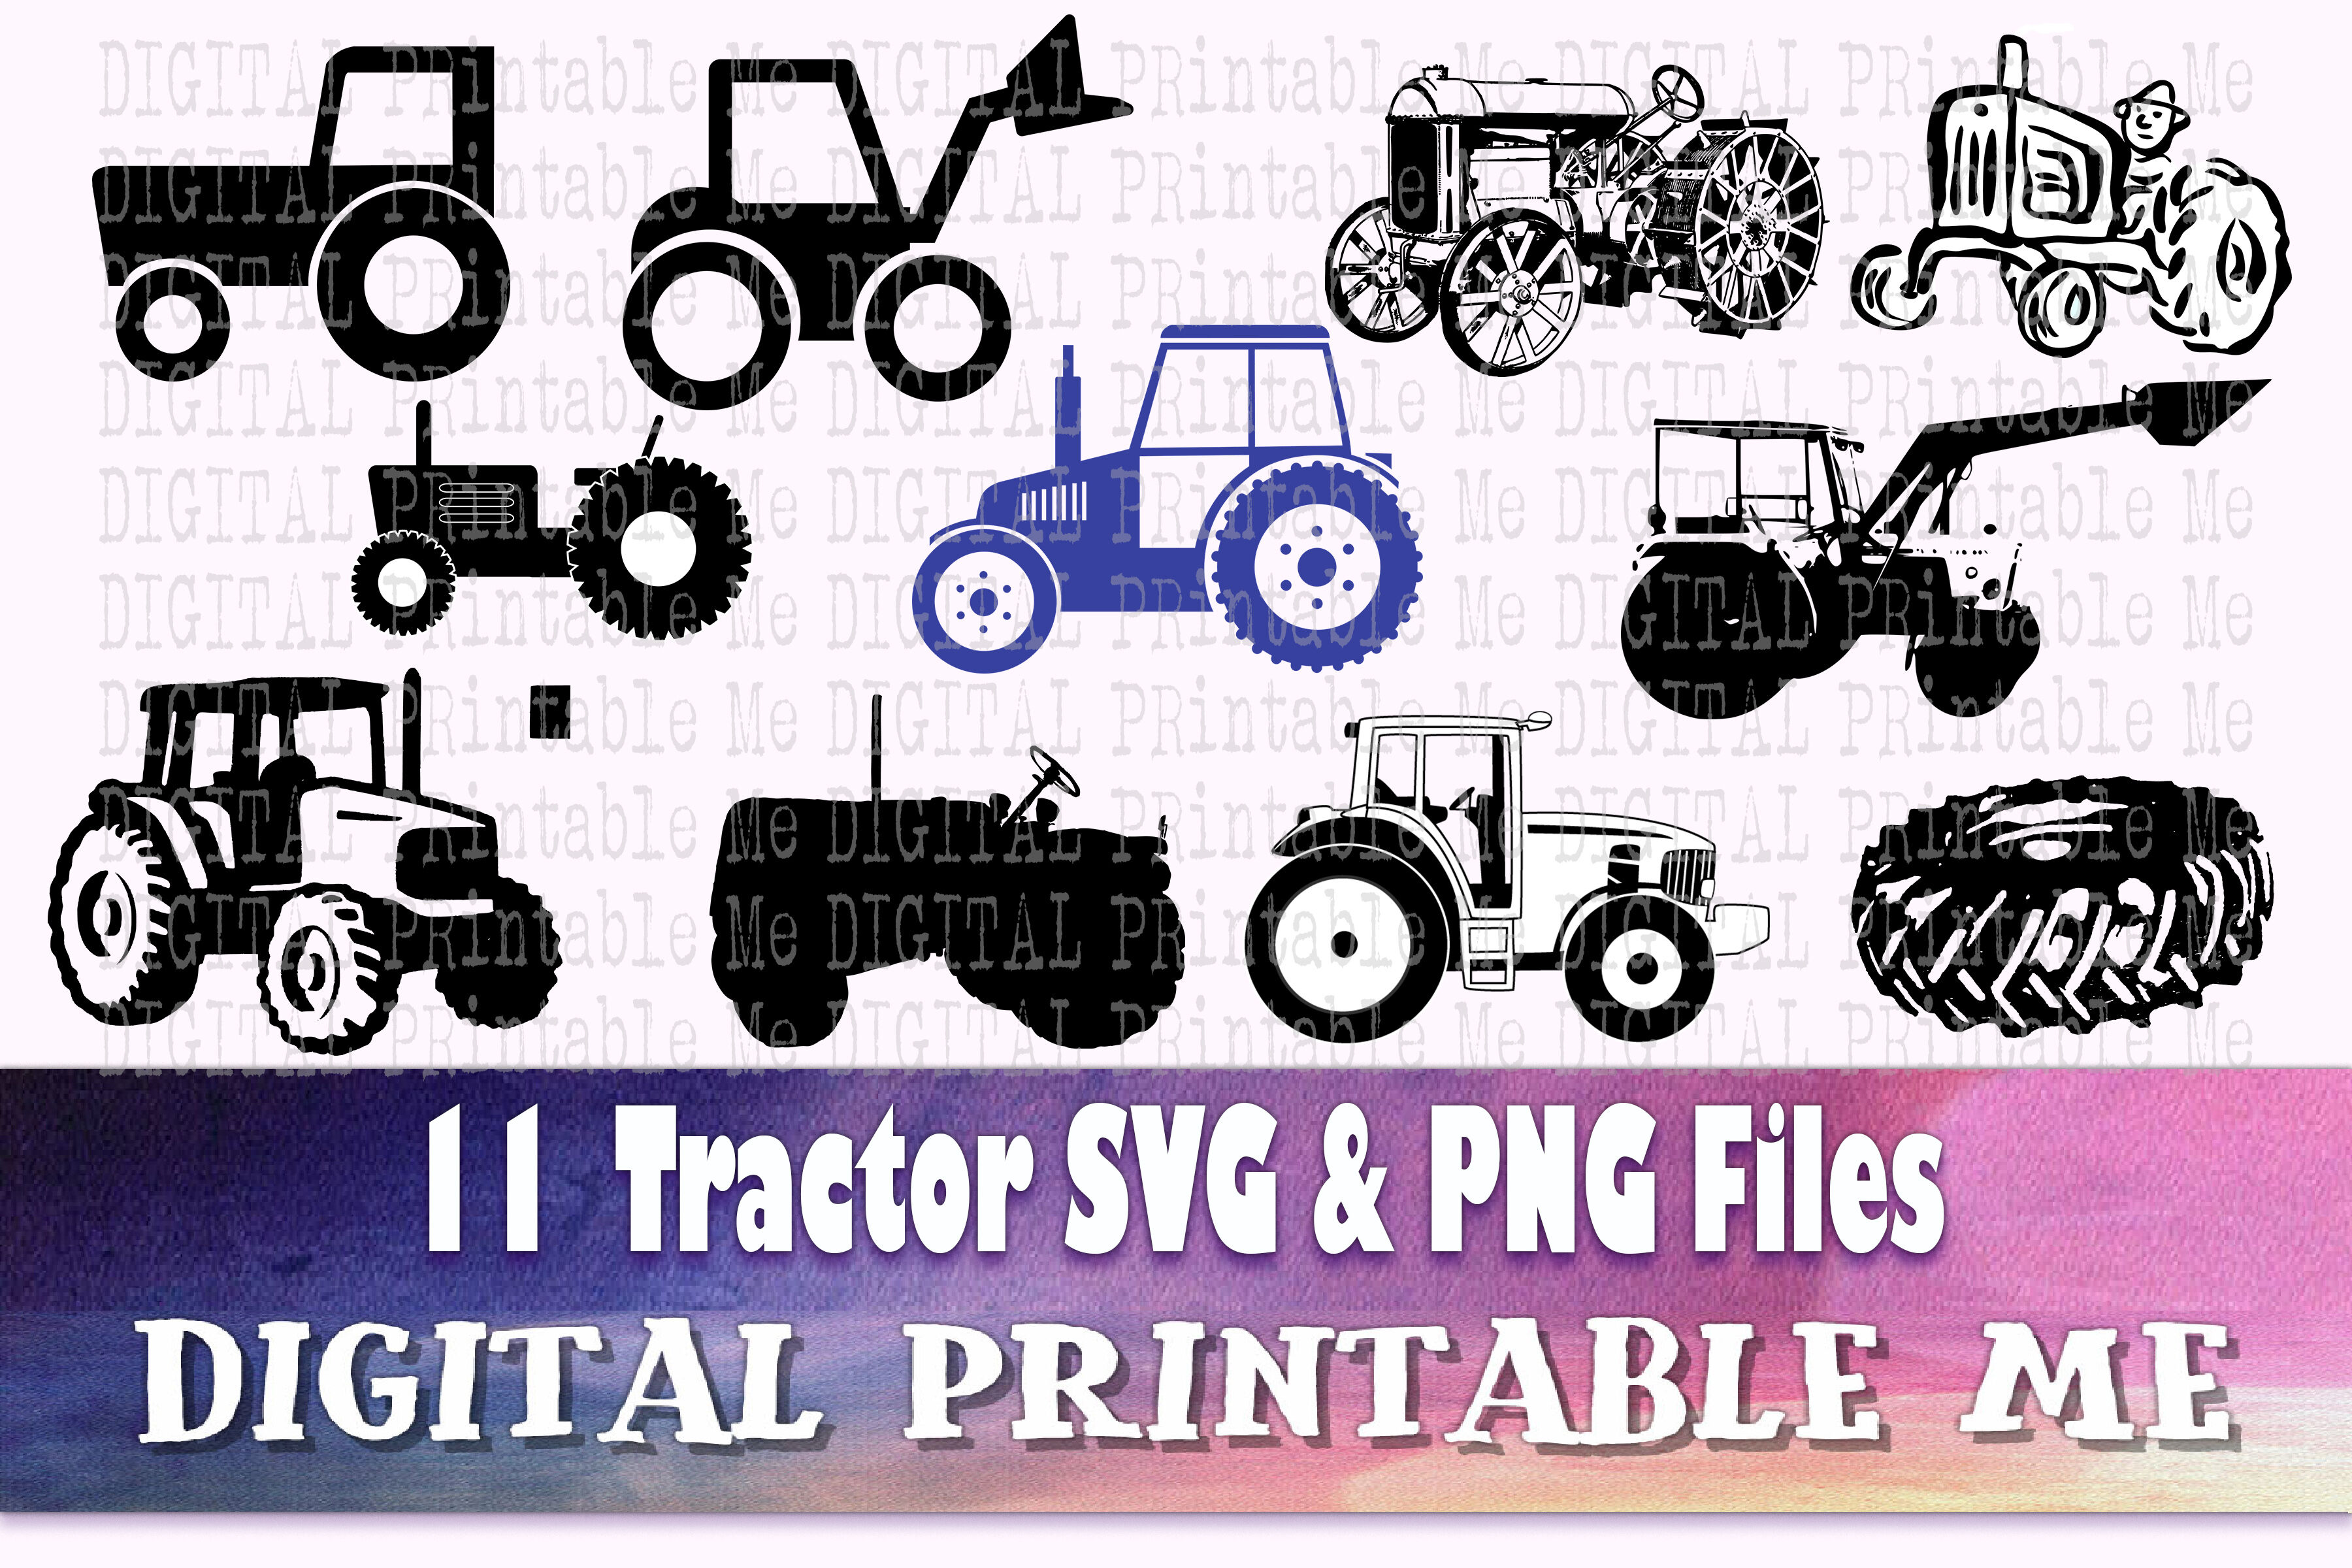 Download Ai Tractor Farm Machine Svg Cutting File Instant Download Farm Birthday Party Cut File Cricut And Silhouette Dxf Sure Cuts Clip Art Art Collectibles